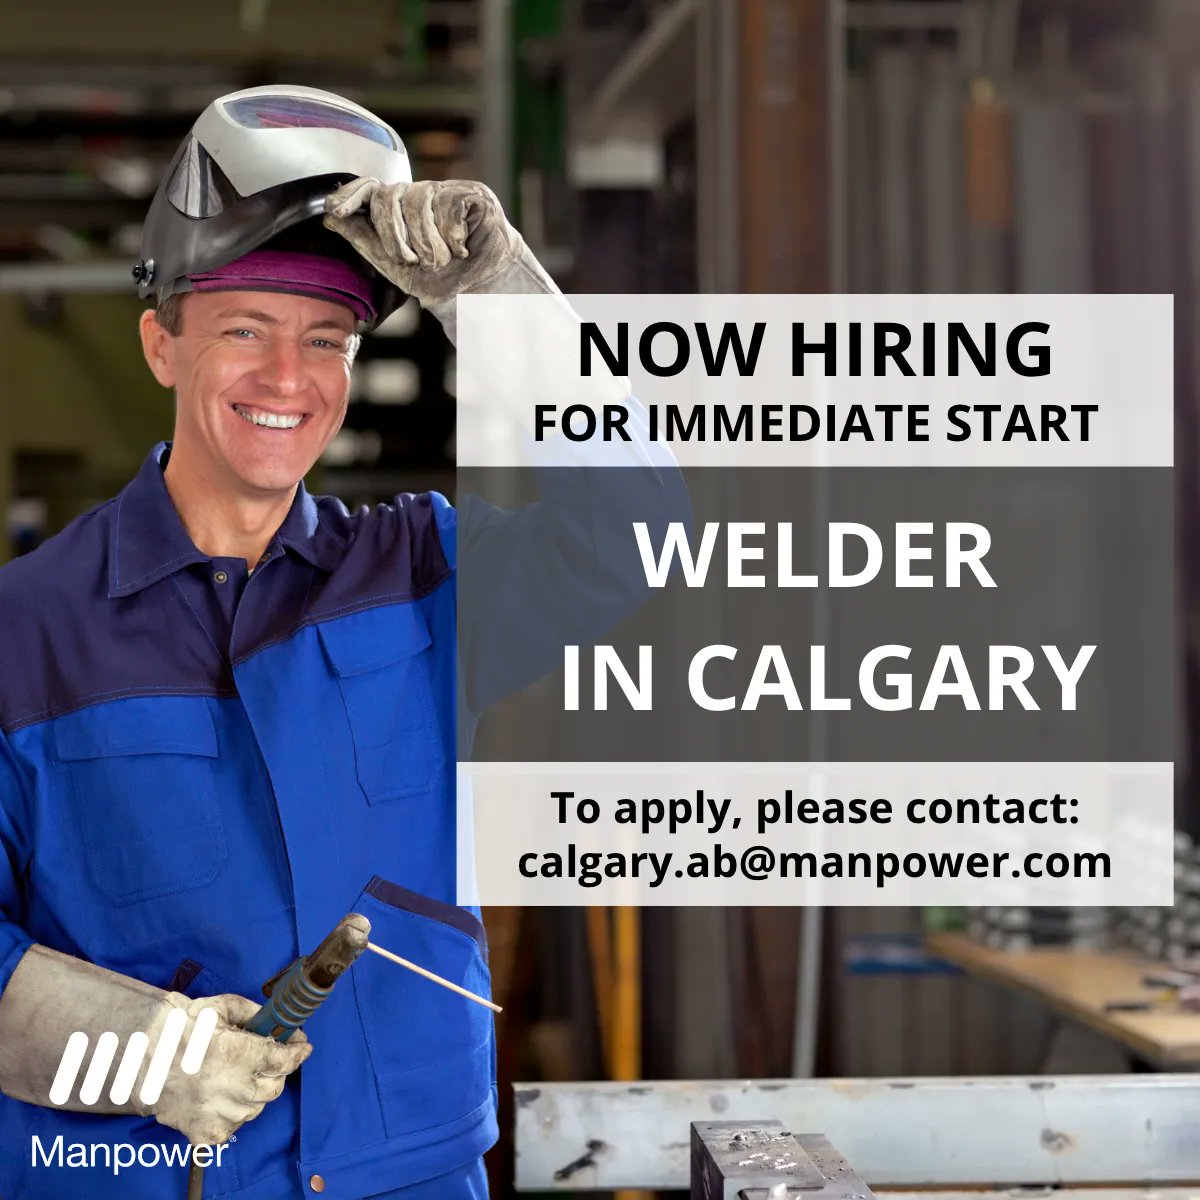 #NOWHIRING: #Welder in #Calgary, #Alberta

To apply, please forward your resume to calgary.ab@manpower.com or apply directly at buff.ly/3MOXSd9 

#manpowerab #albertajobs #canadajobs #jobseekerscanada #yycjobs #calgaryjobs #manpowerjobs #yyc #weldingjobs #weldingyyc